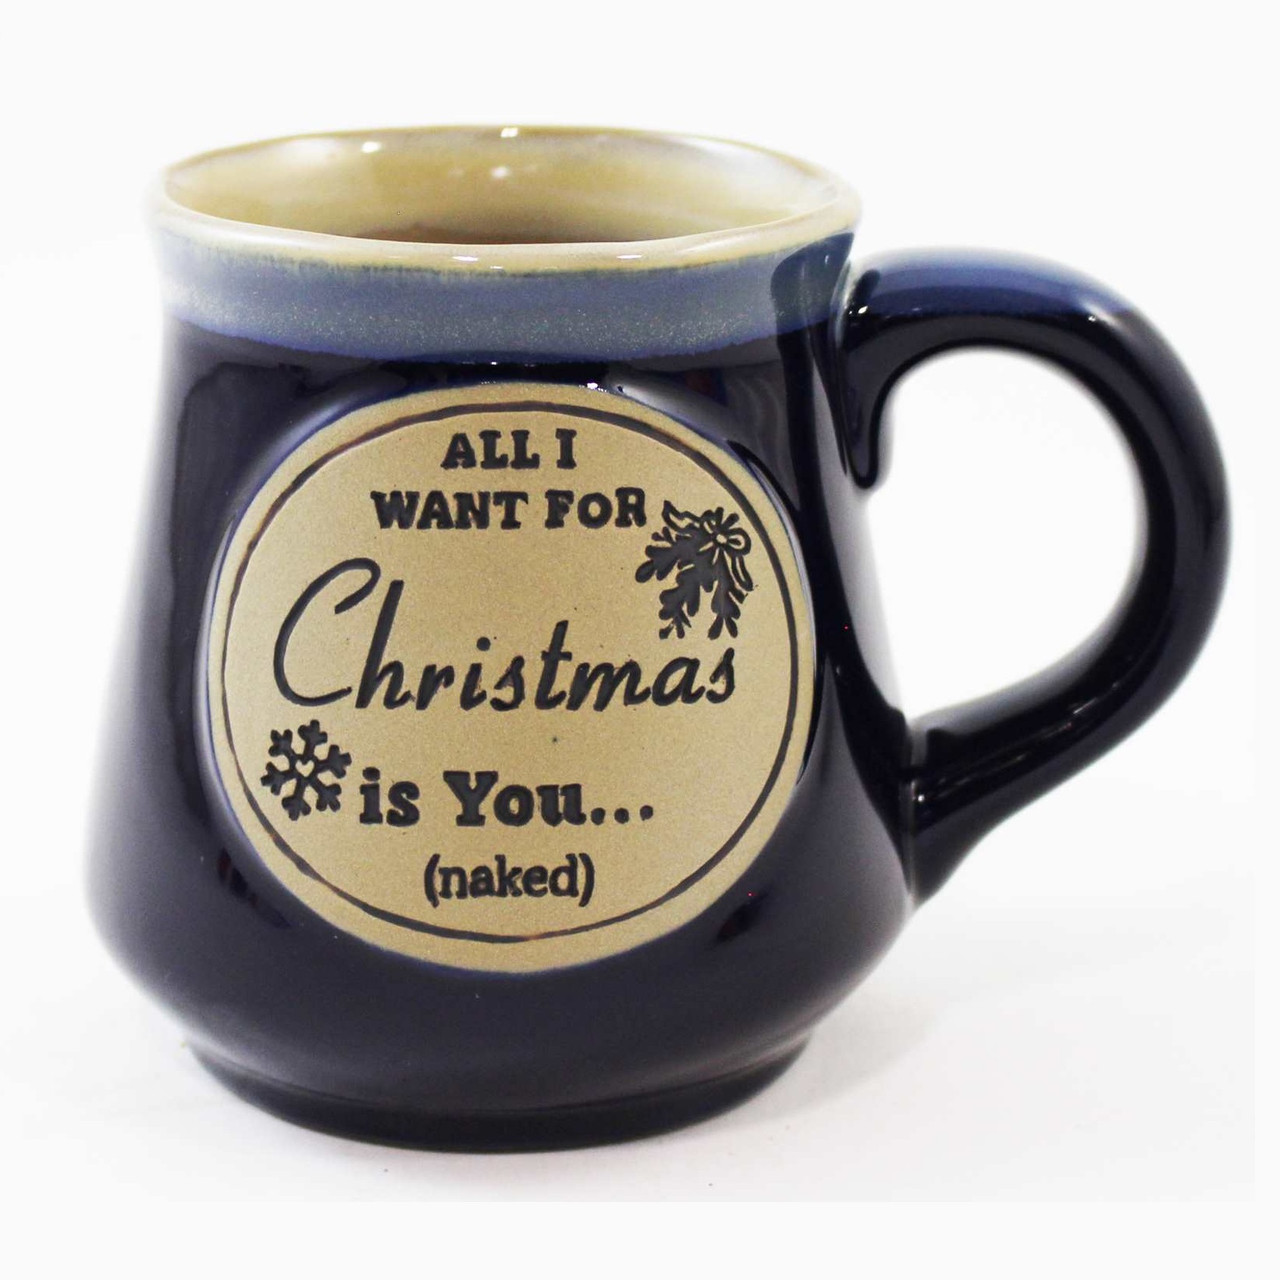 https://cdn11.bigcommerce.com/s-c9a80/images/stencil/1280x1280/products/17998/67833/HYU213_All_I_Want_for_Christmas_is_You_Naked_Mug__42942.1700147561.jpg?c=2